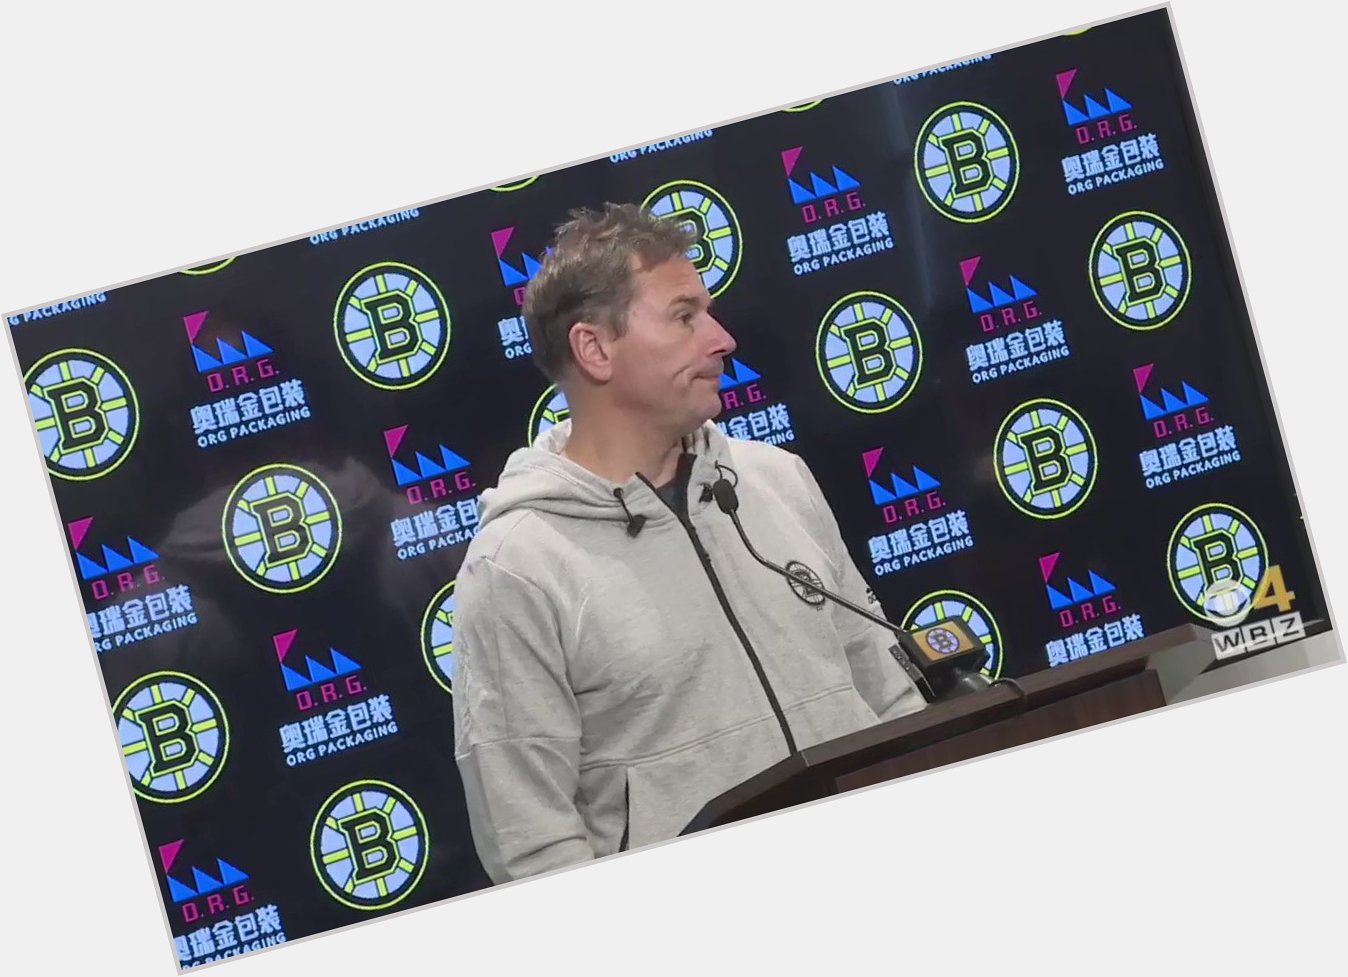  Bruce Cassidy said the players sang happy birthday to Zdeno Chara and got him a cake  